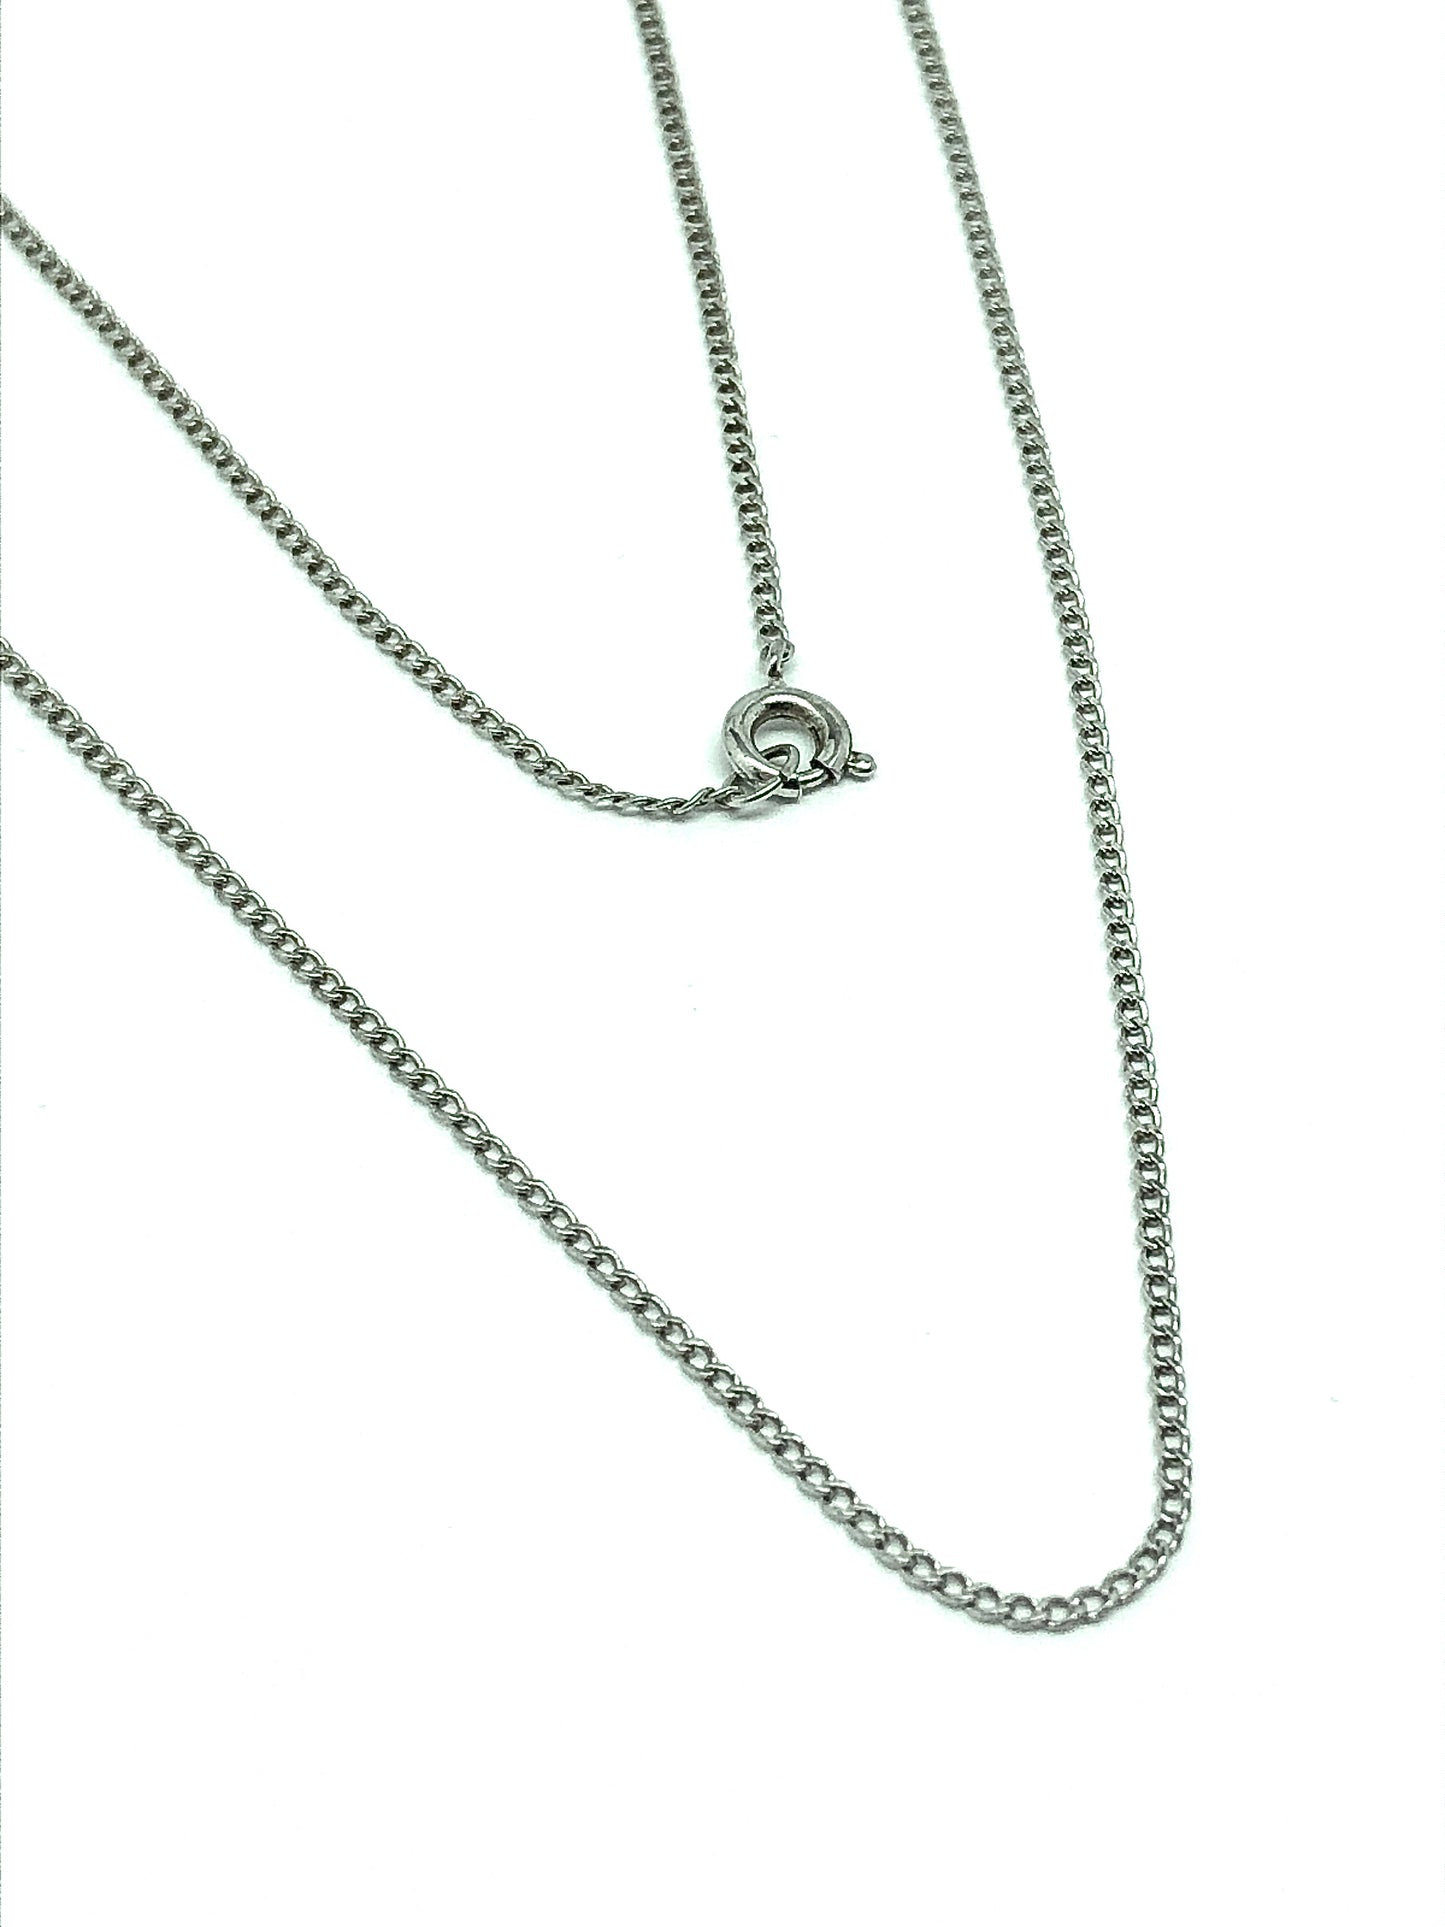 Vintage 1960s Solid Sterling Silver Feminine Fine Curb Chain Necklace - Blingschlingers USA